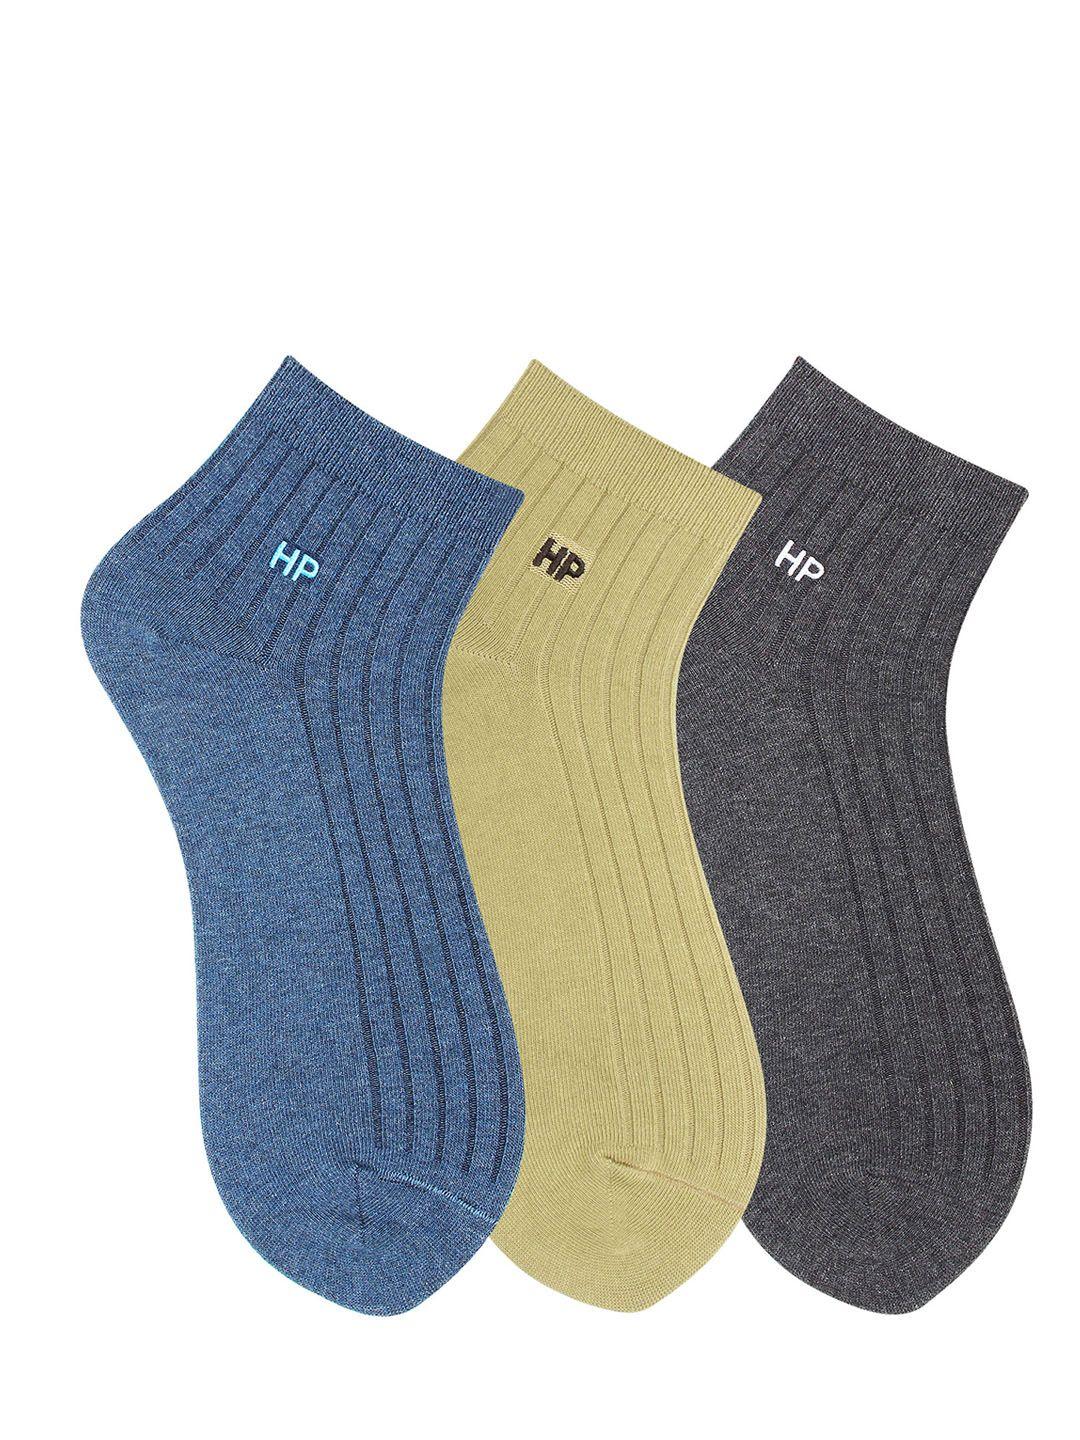 hush puppies men pack of 3 assorted solid ankle-length socks